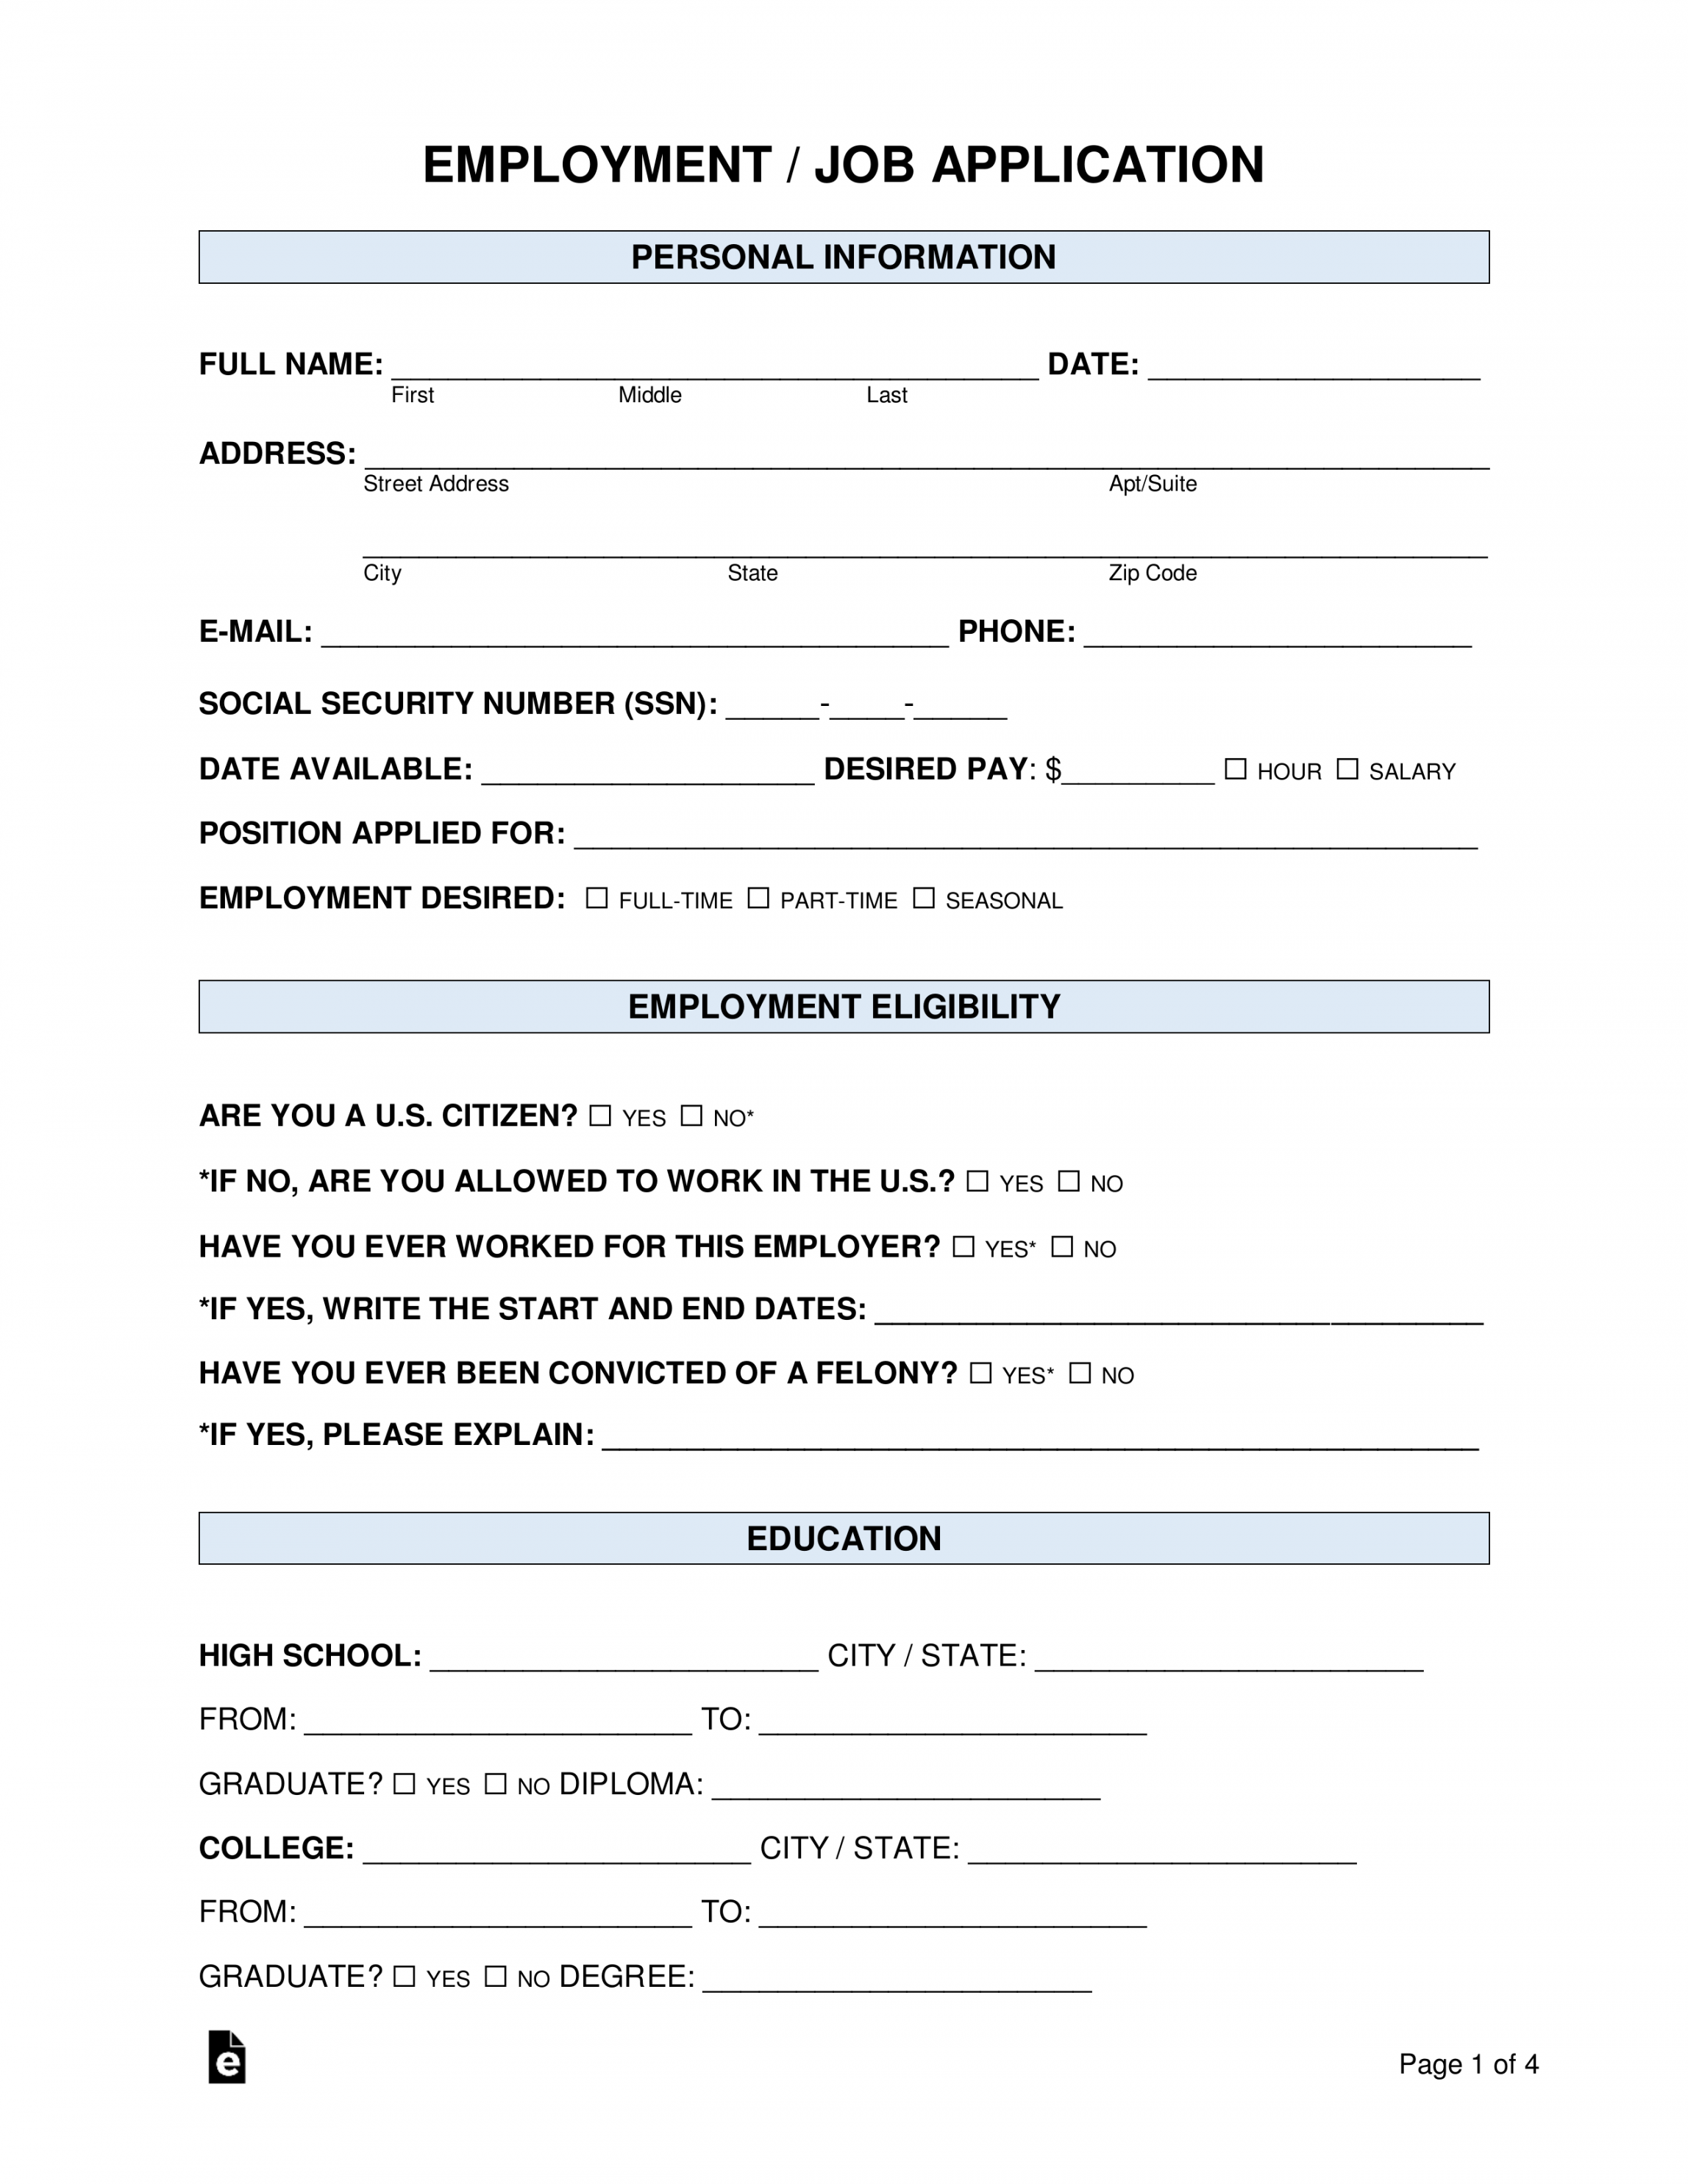 Application For Employment Form Free Printable - Printable - Free Job Application Form - Standard Template - PDF  Word – eForms